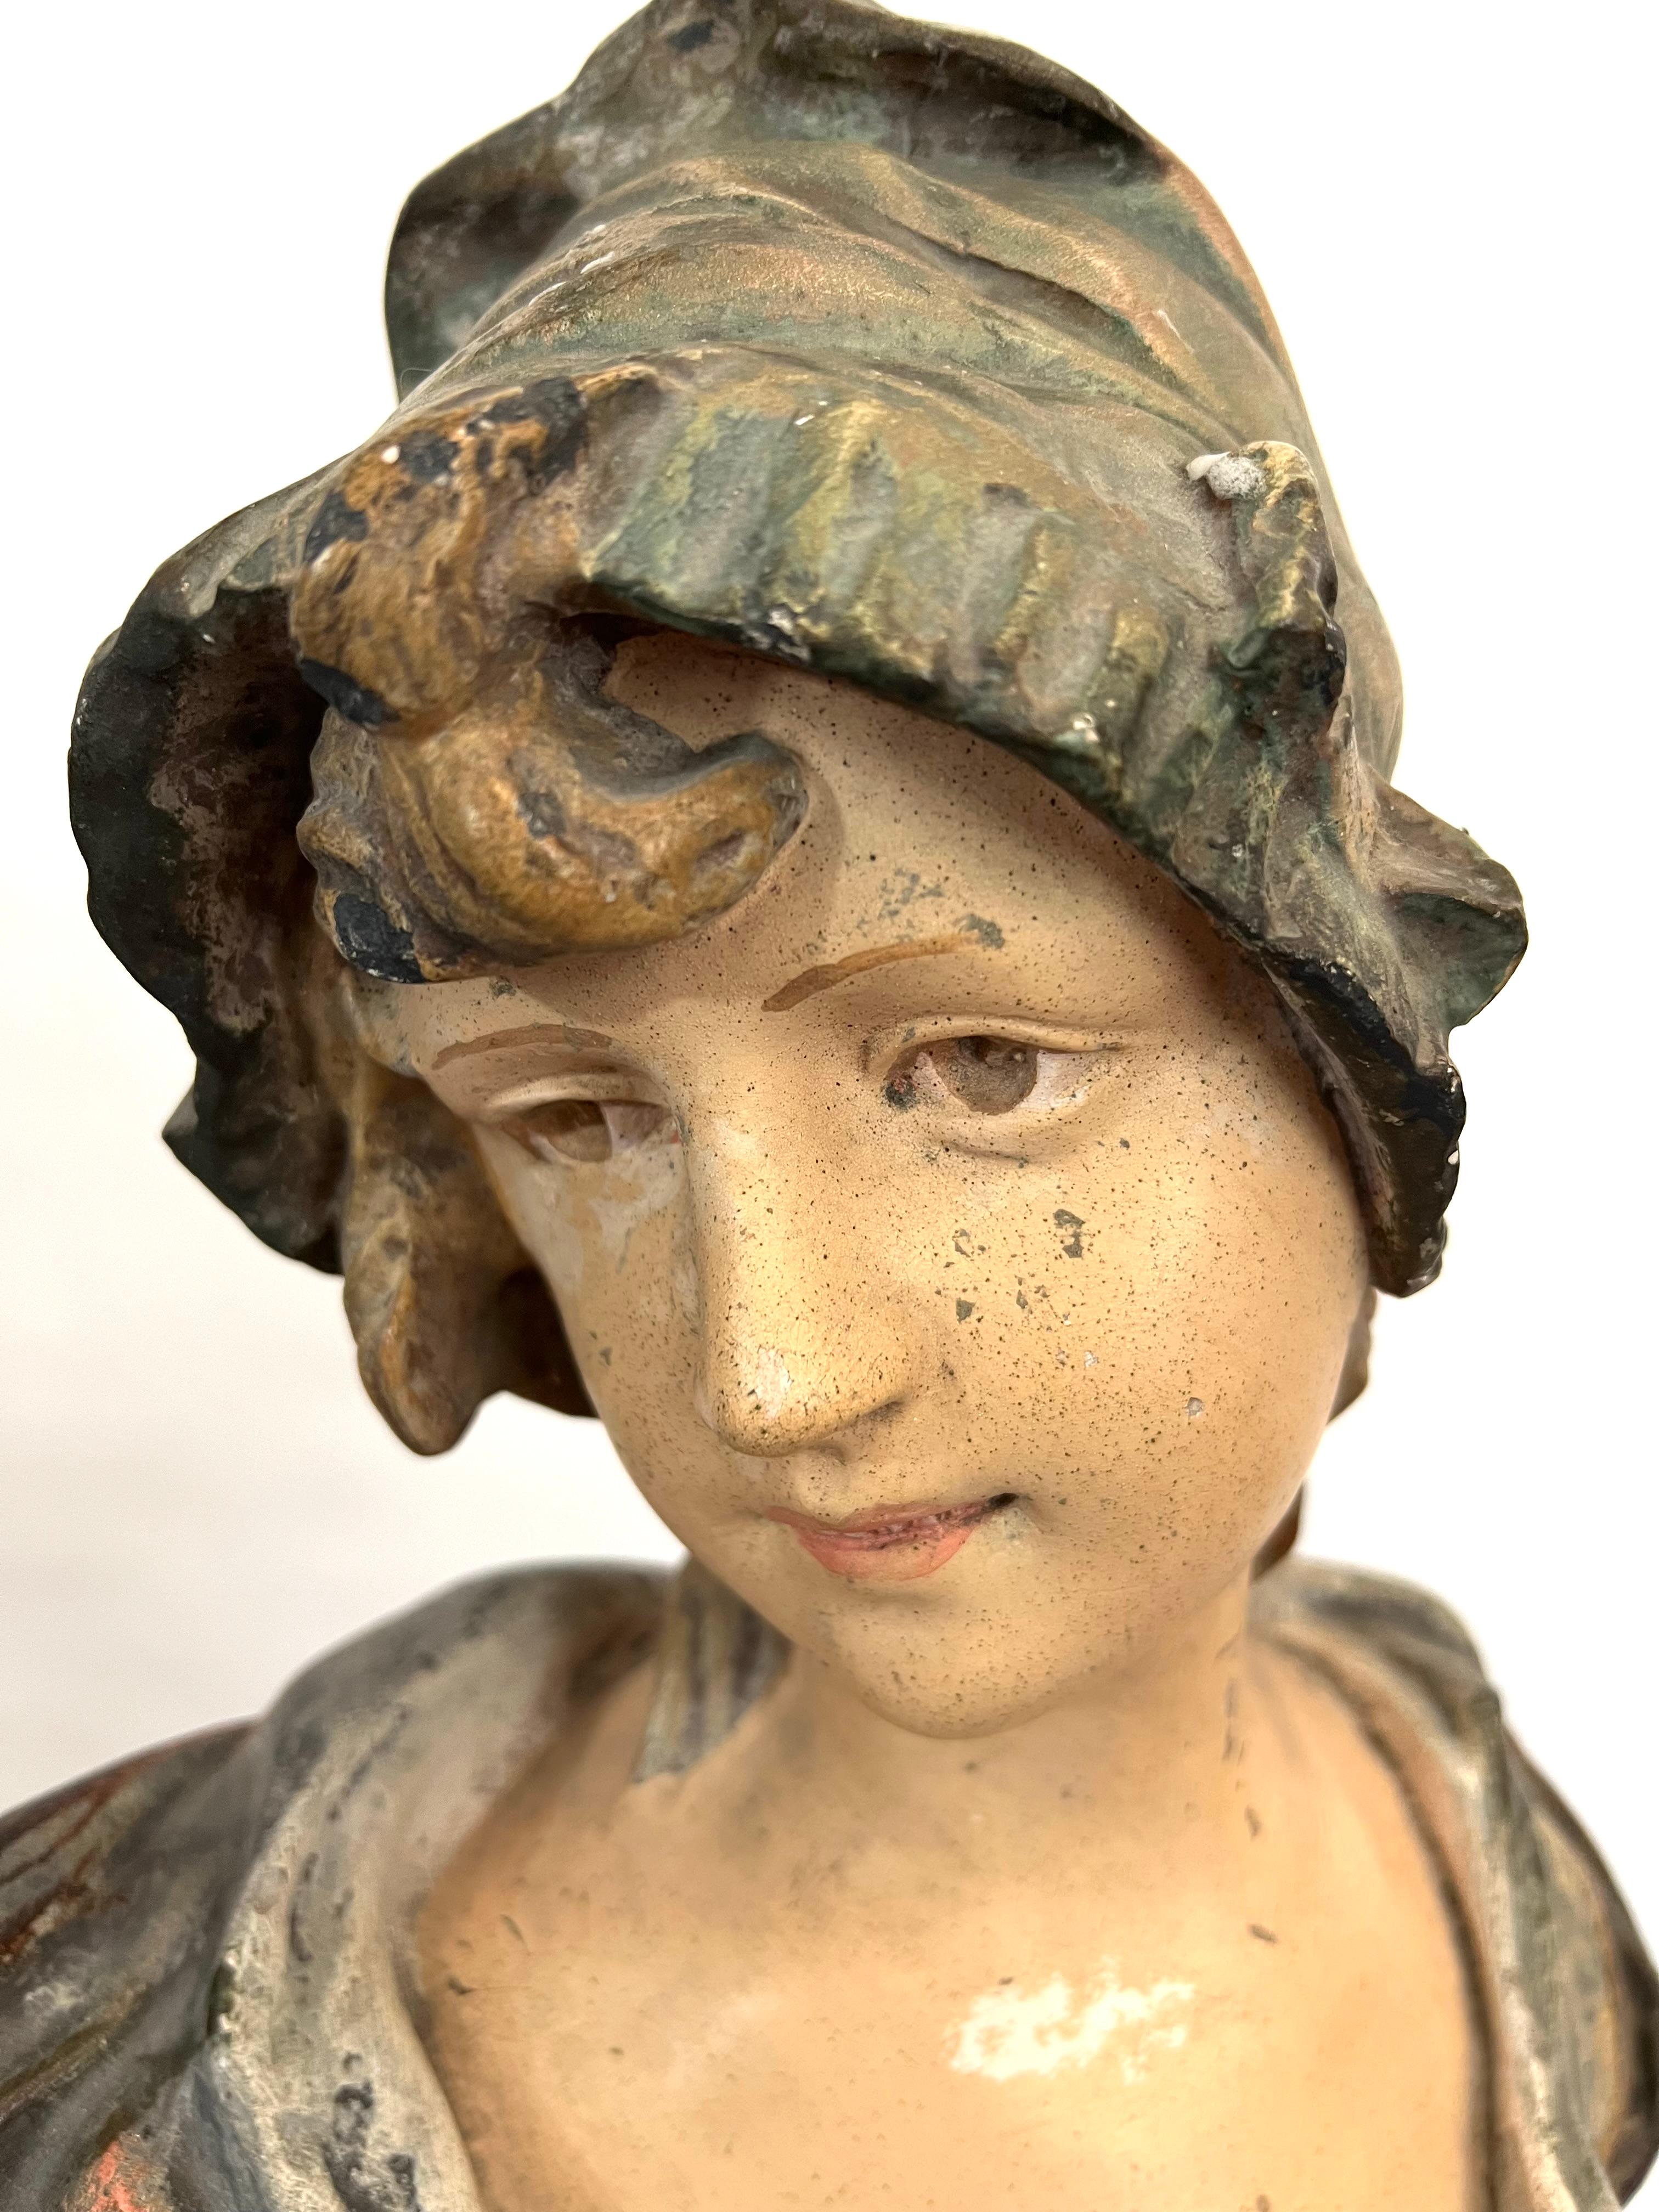 Superb and rare polychrome plaster sculpture representing the bust of a young woman wearing a bow dress and a hat.
The bust is signed on the side but the signature is difficult to read.
Period: early 1900

This woman’s bust is in Villanis'